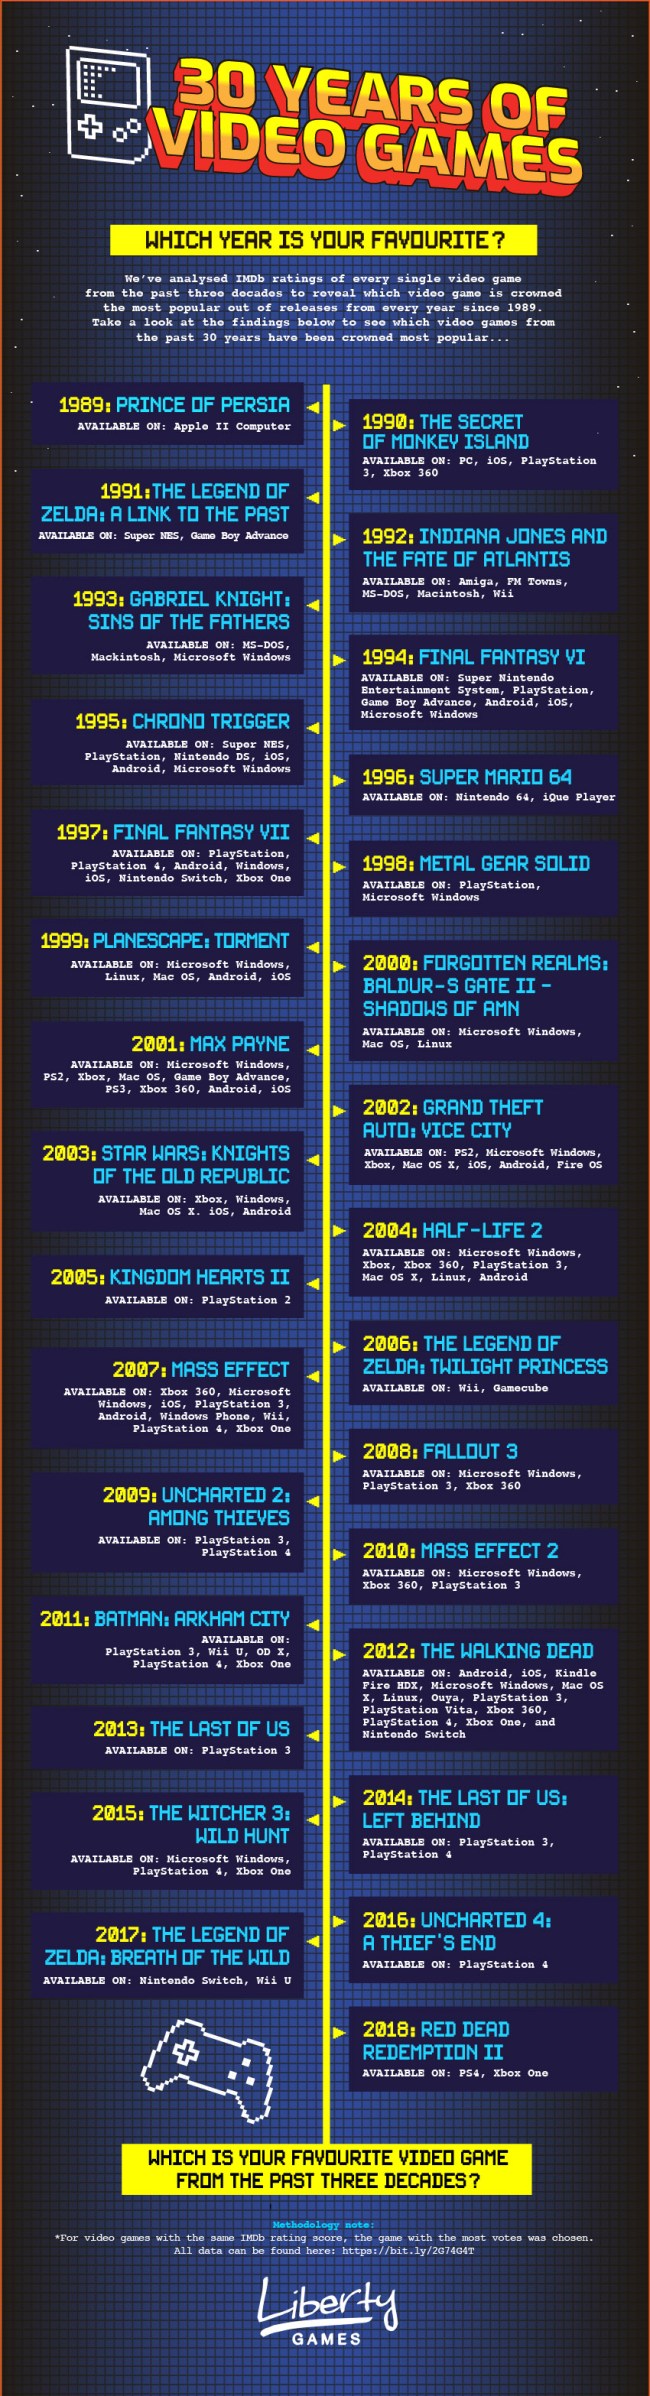 Most Popular Video Game By Year From 1989 To 2018